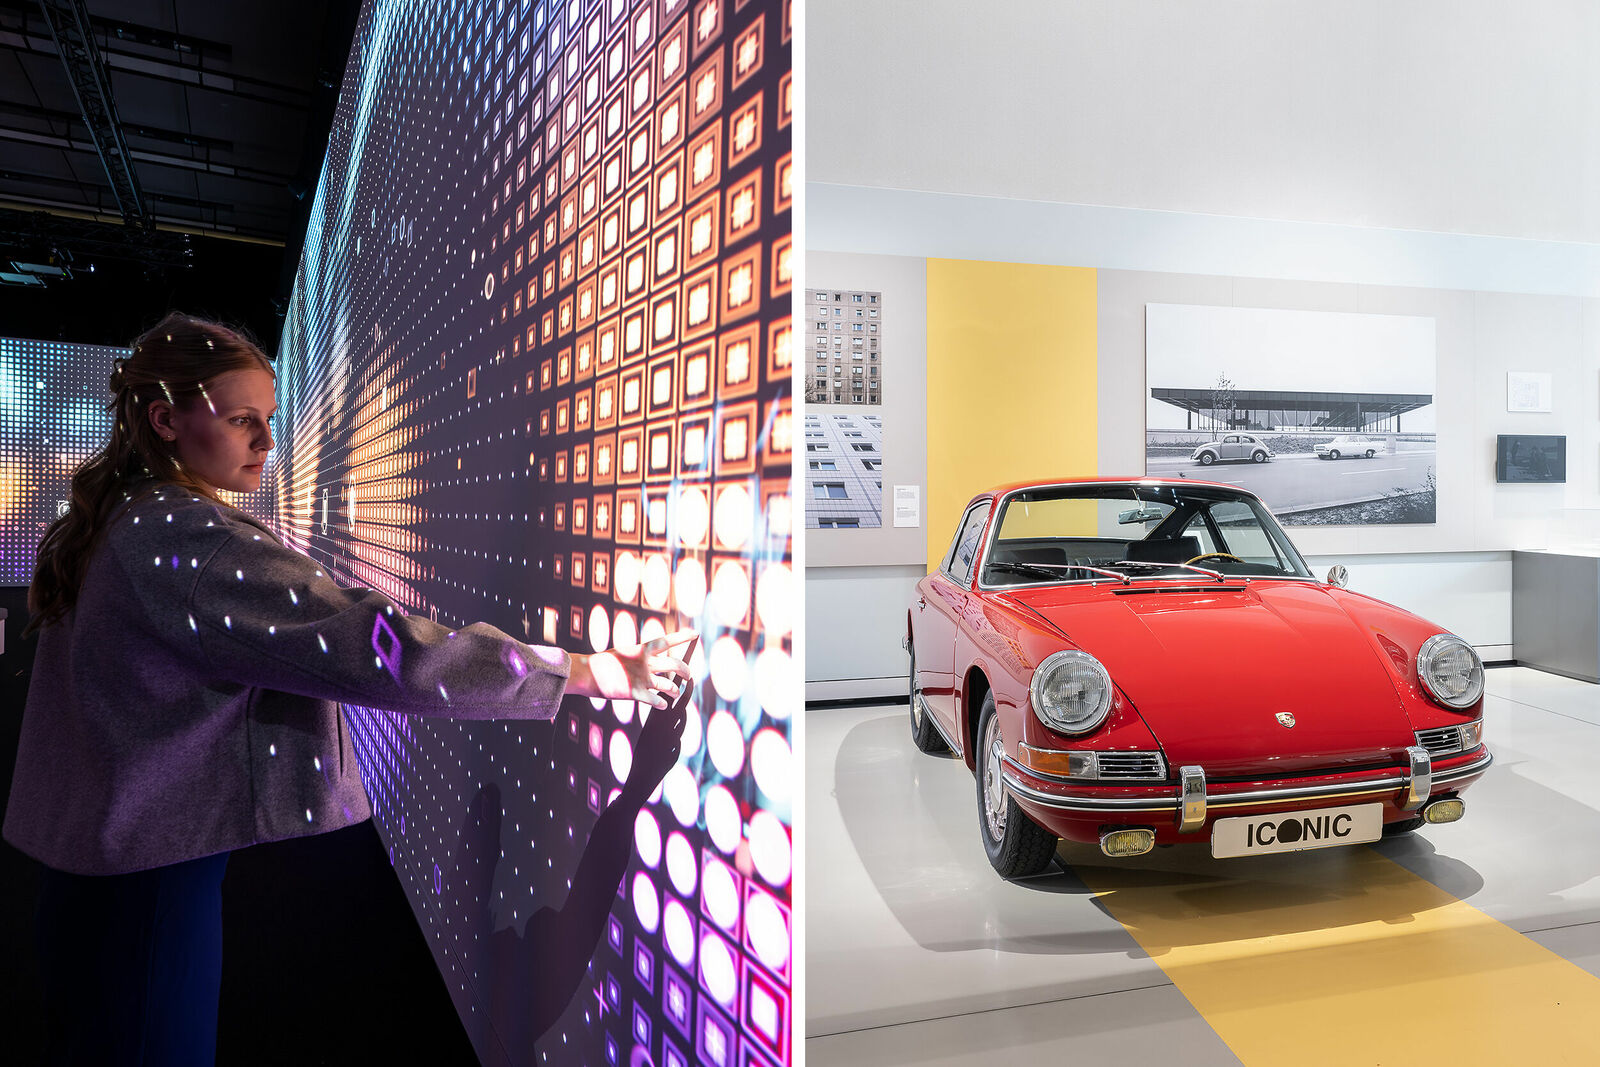 A person interacts with a wall display showing a colorful pattern of glowing squares. Next to it is a historic Porsche vehicle.